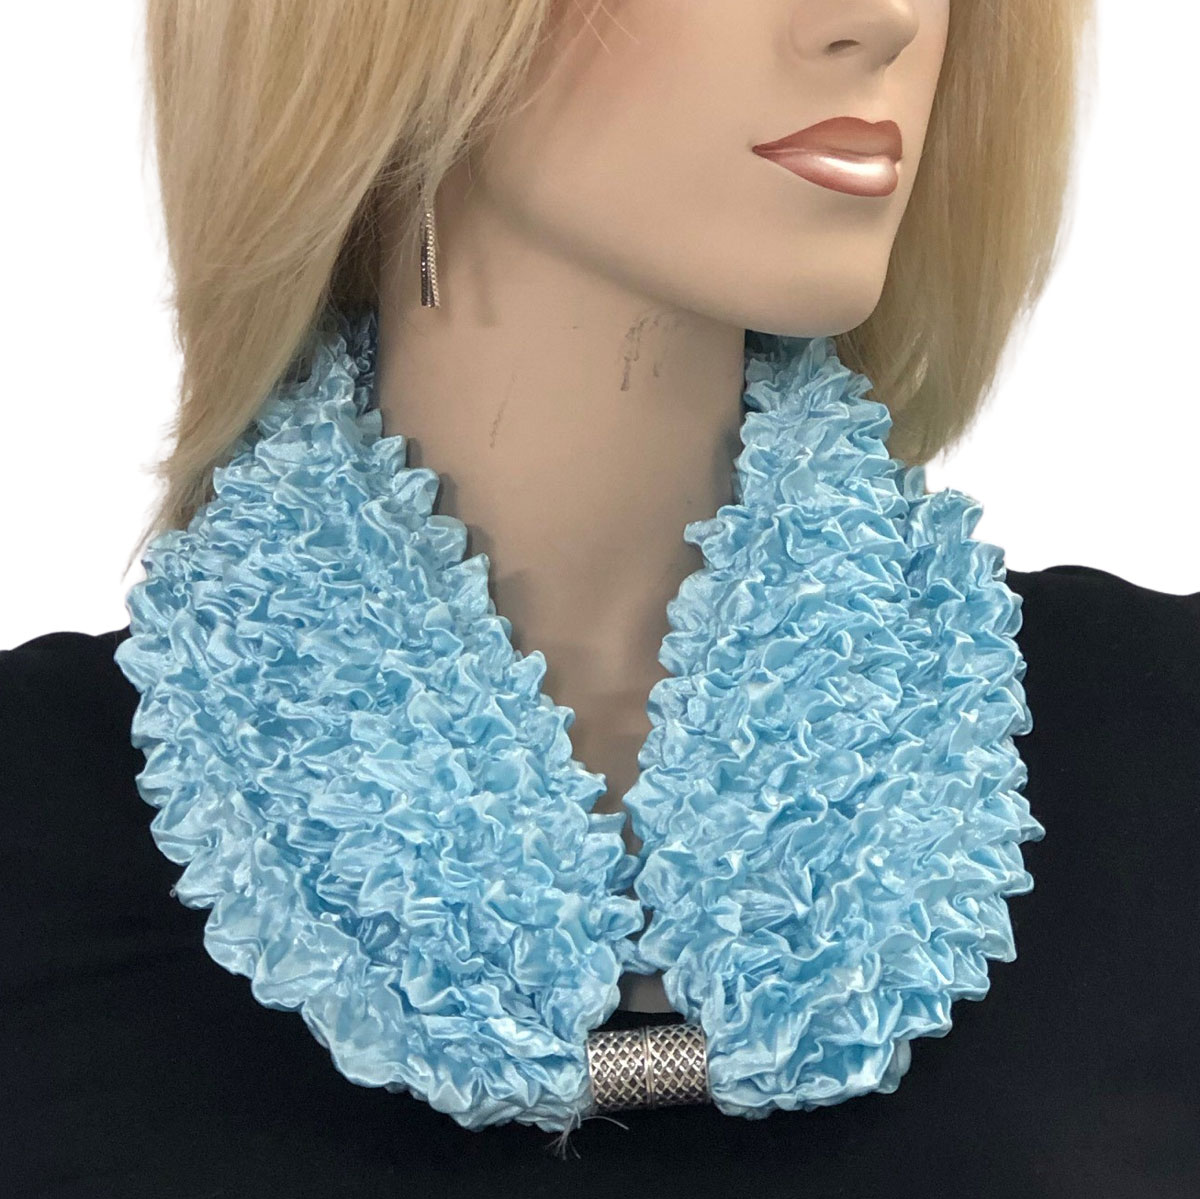 Magnetic Clasp Scarves - Coin + Bubble Satin 3302 MINT Coin Fishscale Satin Magnetic Clasp Scarf    MB - 